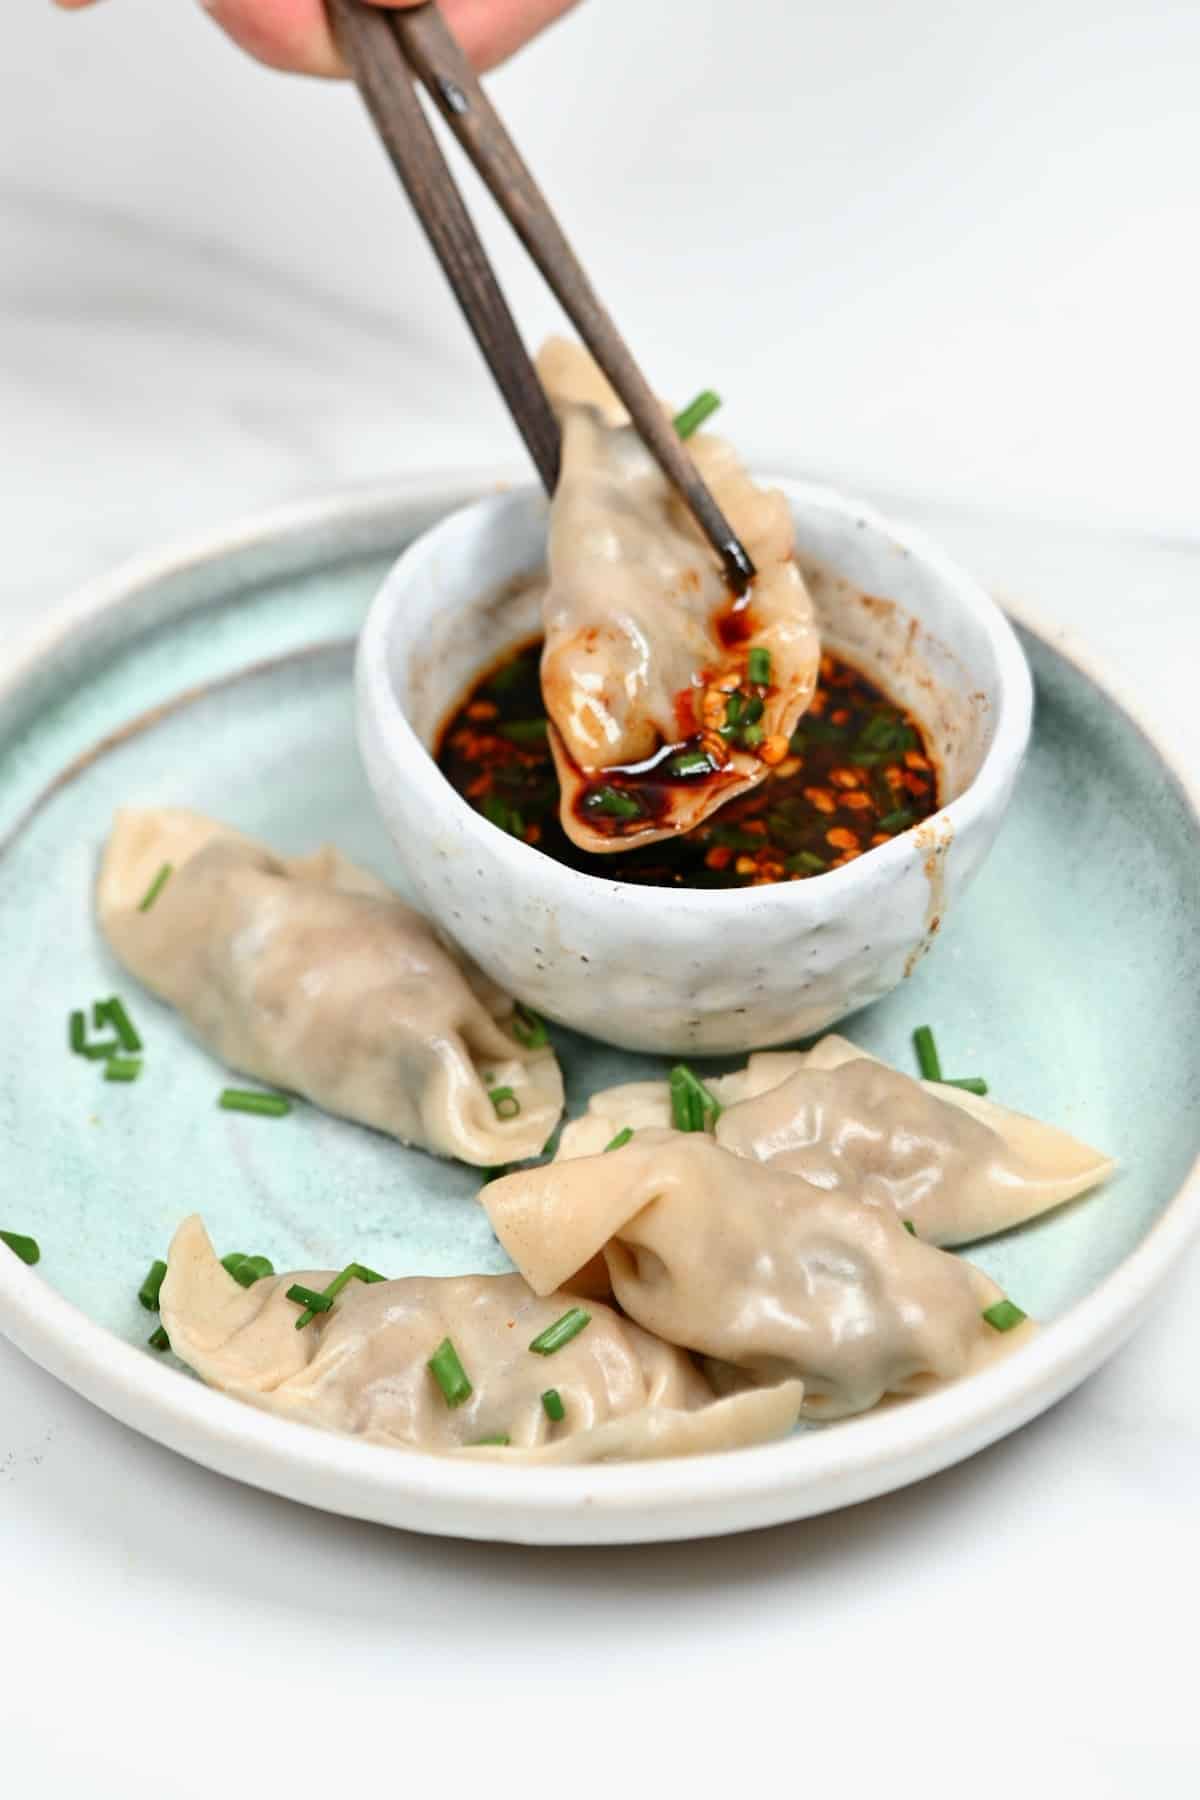 Dipping a dumpling into chili sauce